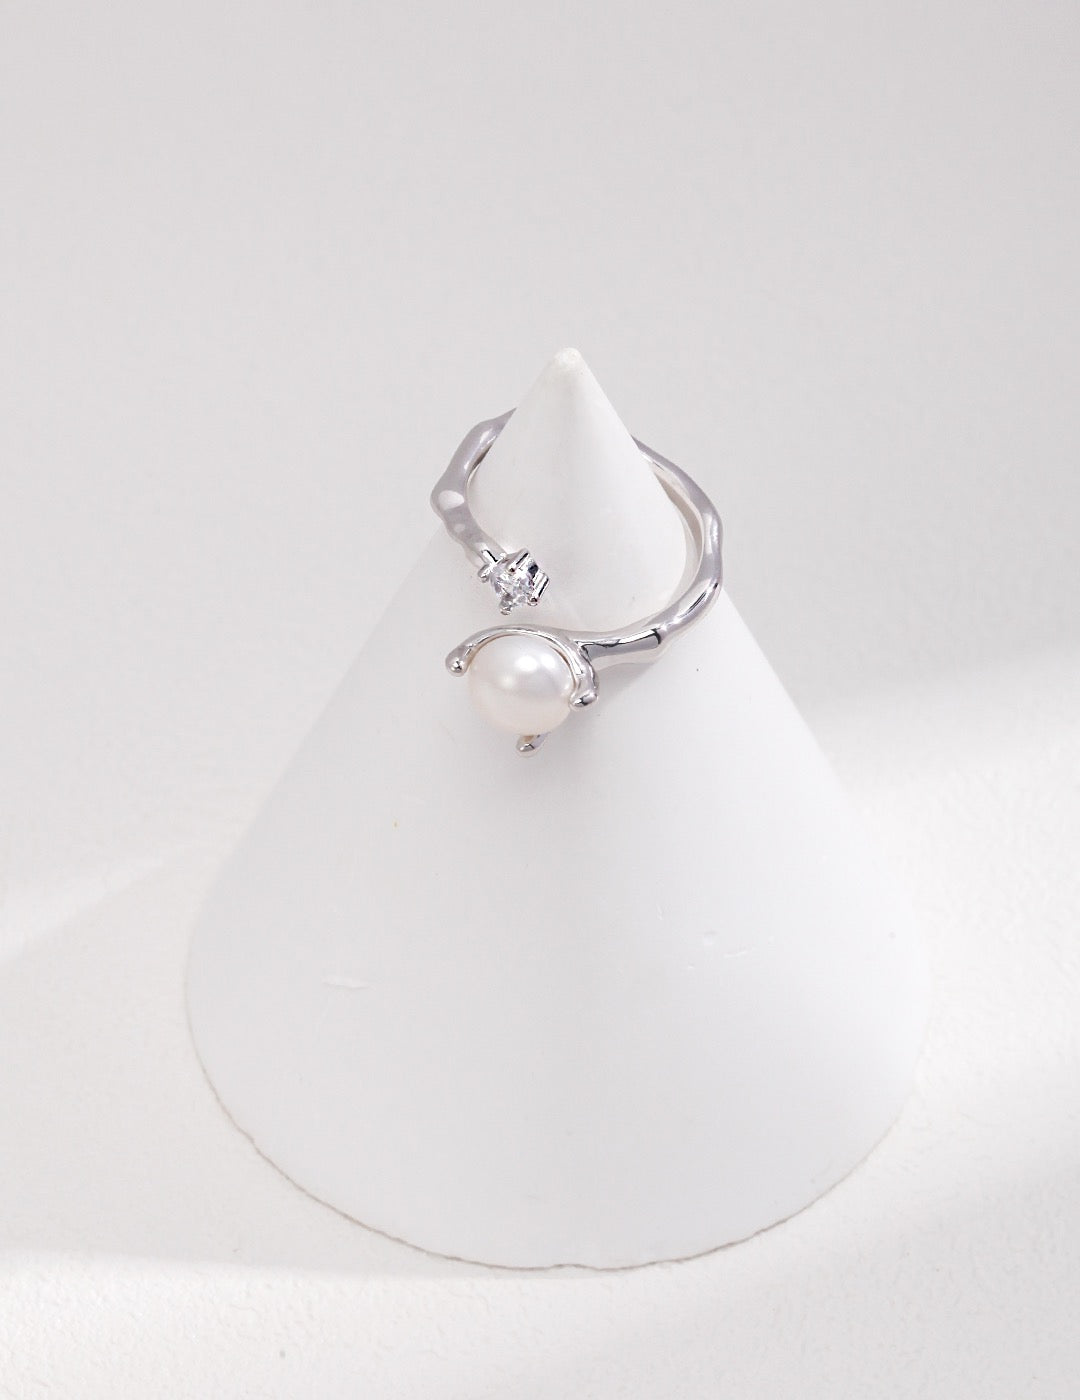 Pearl Ring, Minimalist Ring, Adjustable Ring, Bridal Pearl Ring, Wedding Jewelry, Birthday Gift for Her, Bridesmaid Gifts